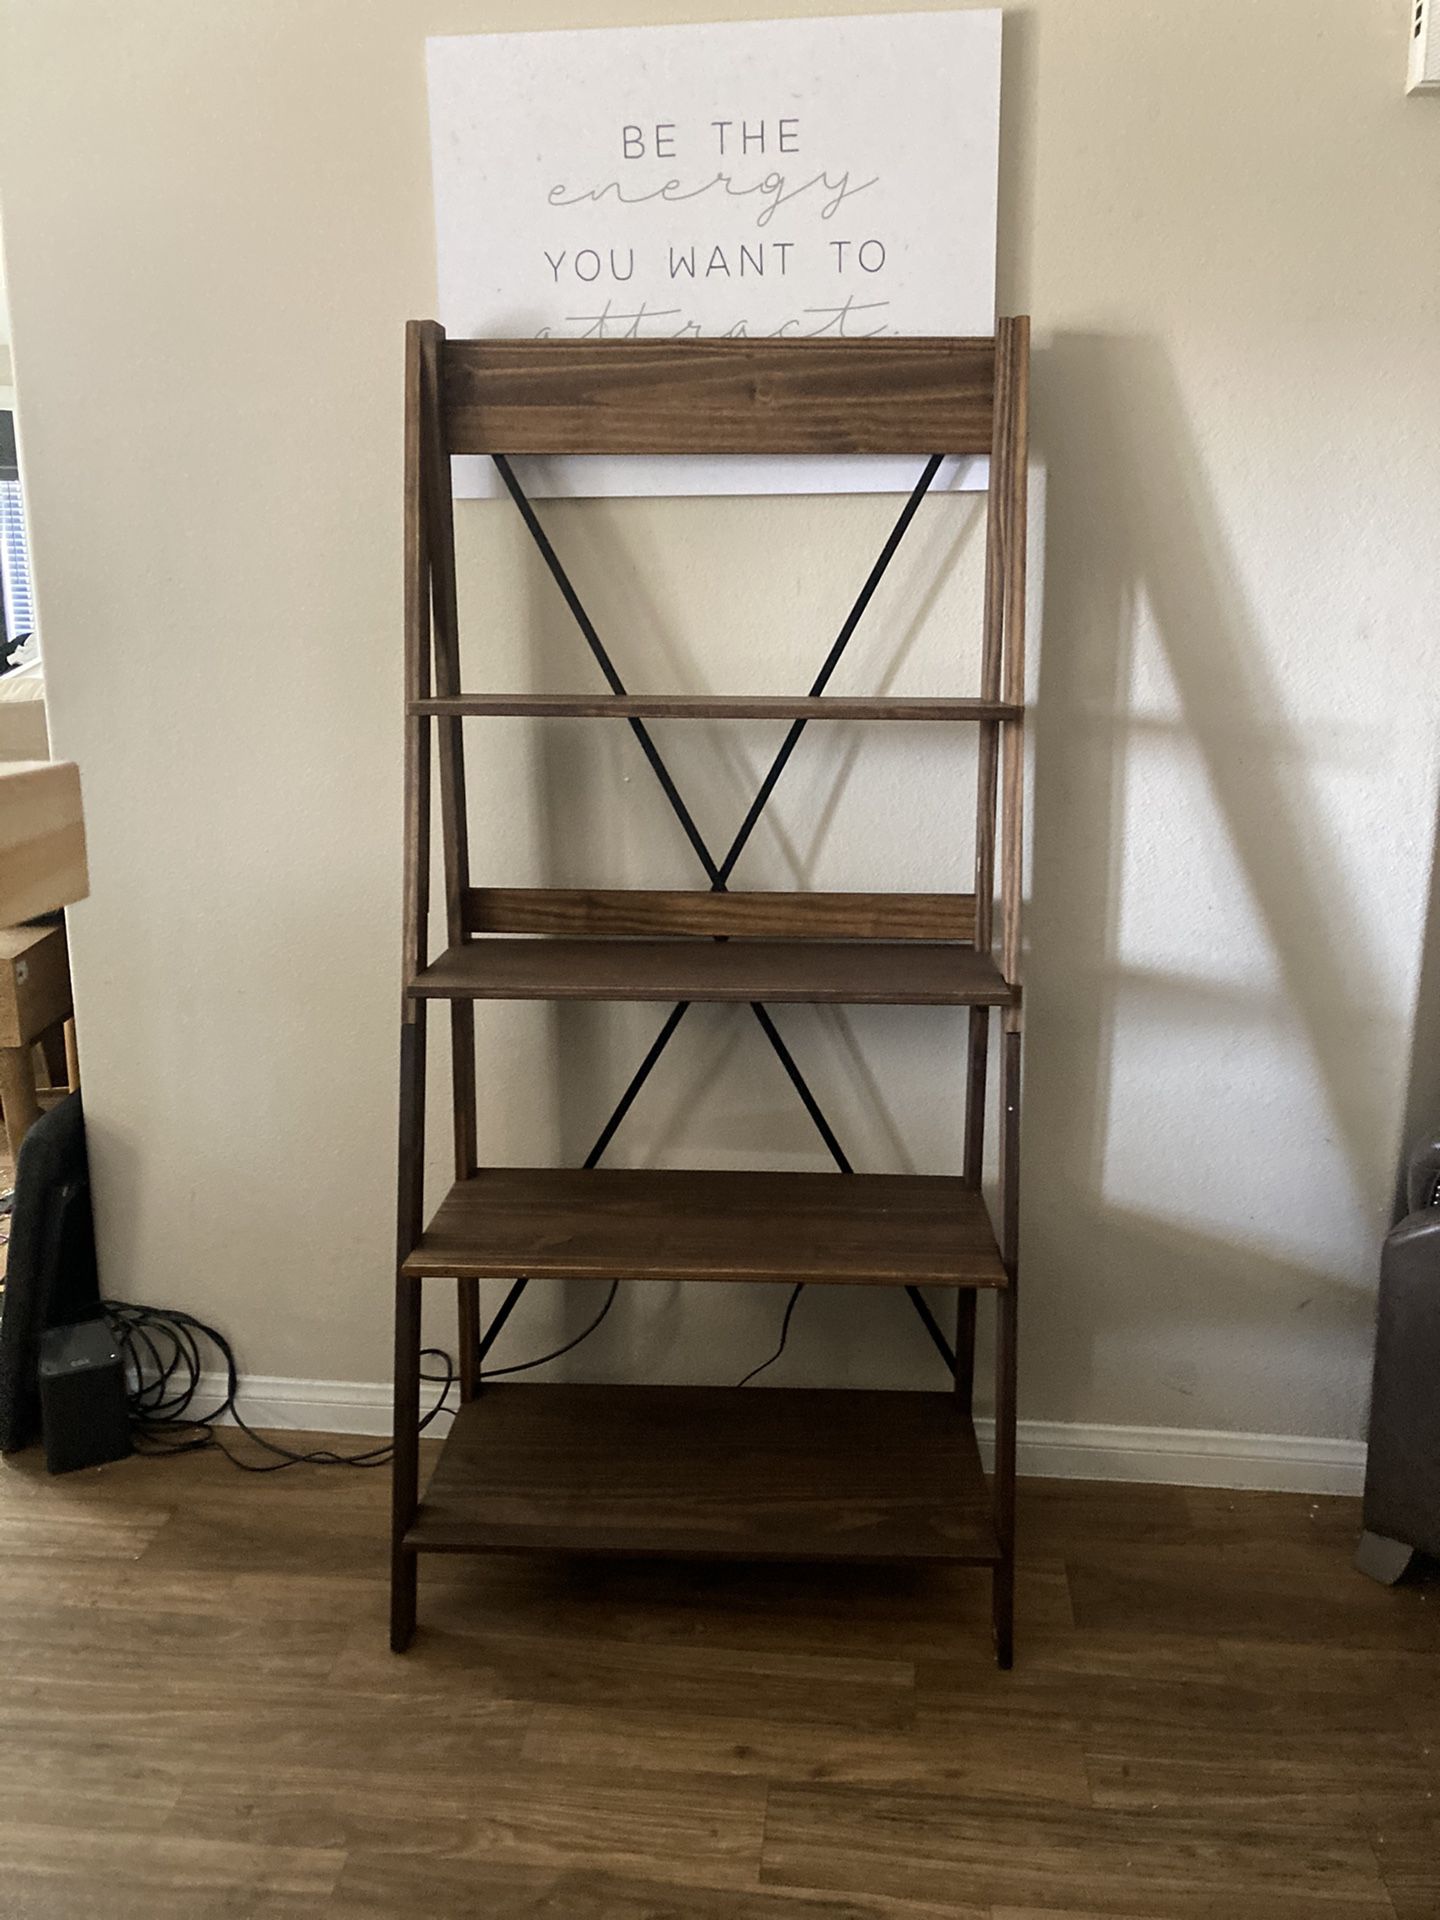 New 68" Solid Wood /Metal mix Leaning Ladder Bookshelf - Brown  Awesome 🏷 Deal  🚚 Delivery Avail   ➡️ Details Below ⬇️  